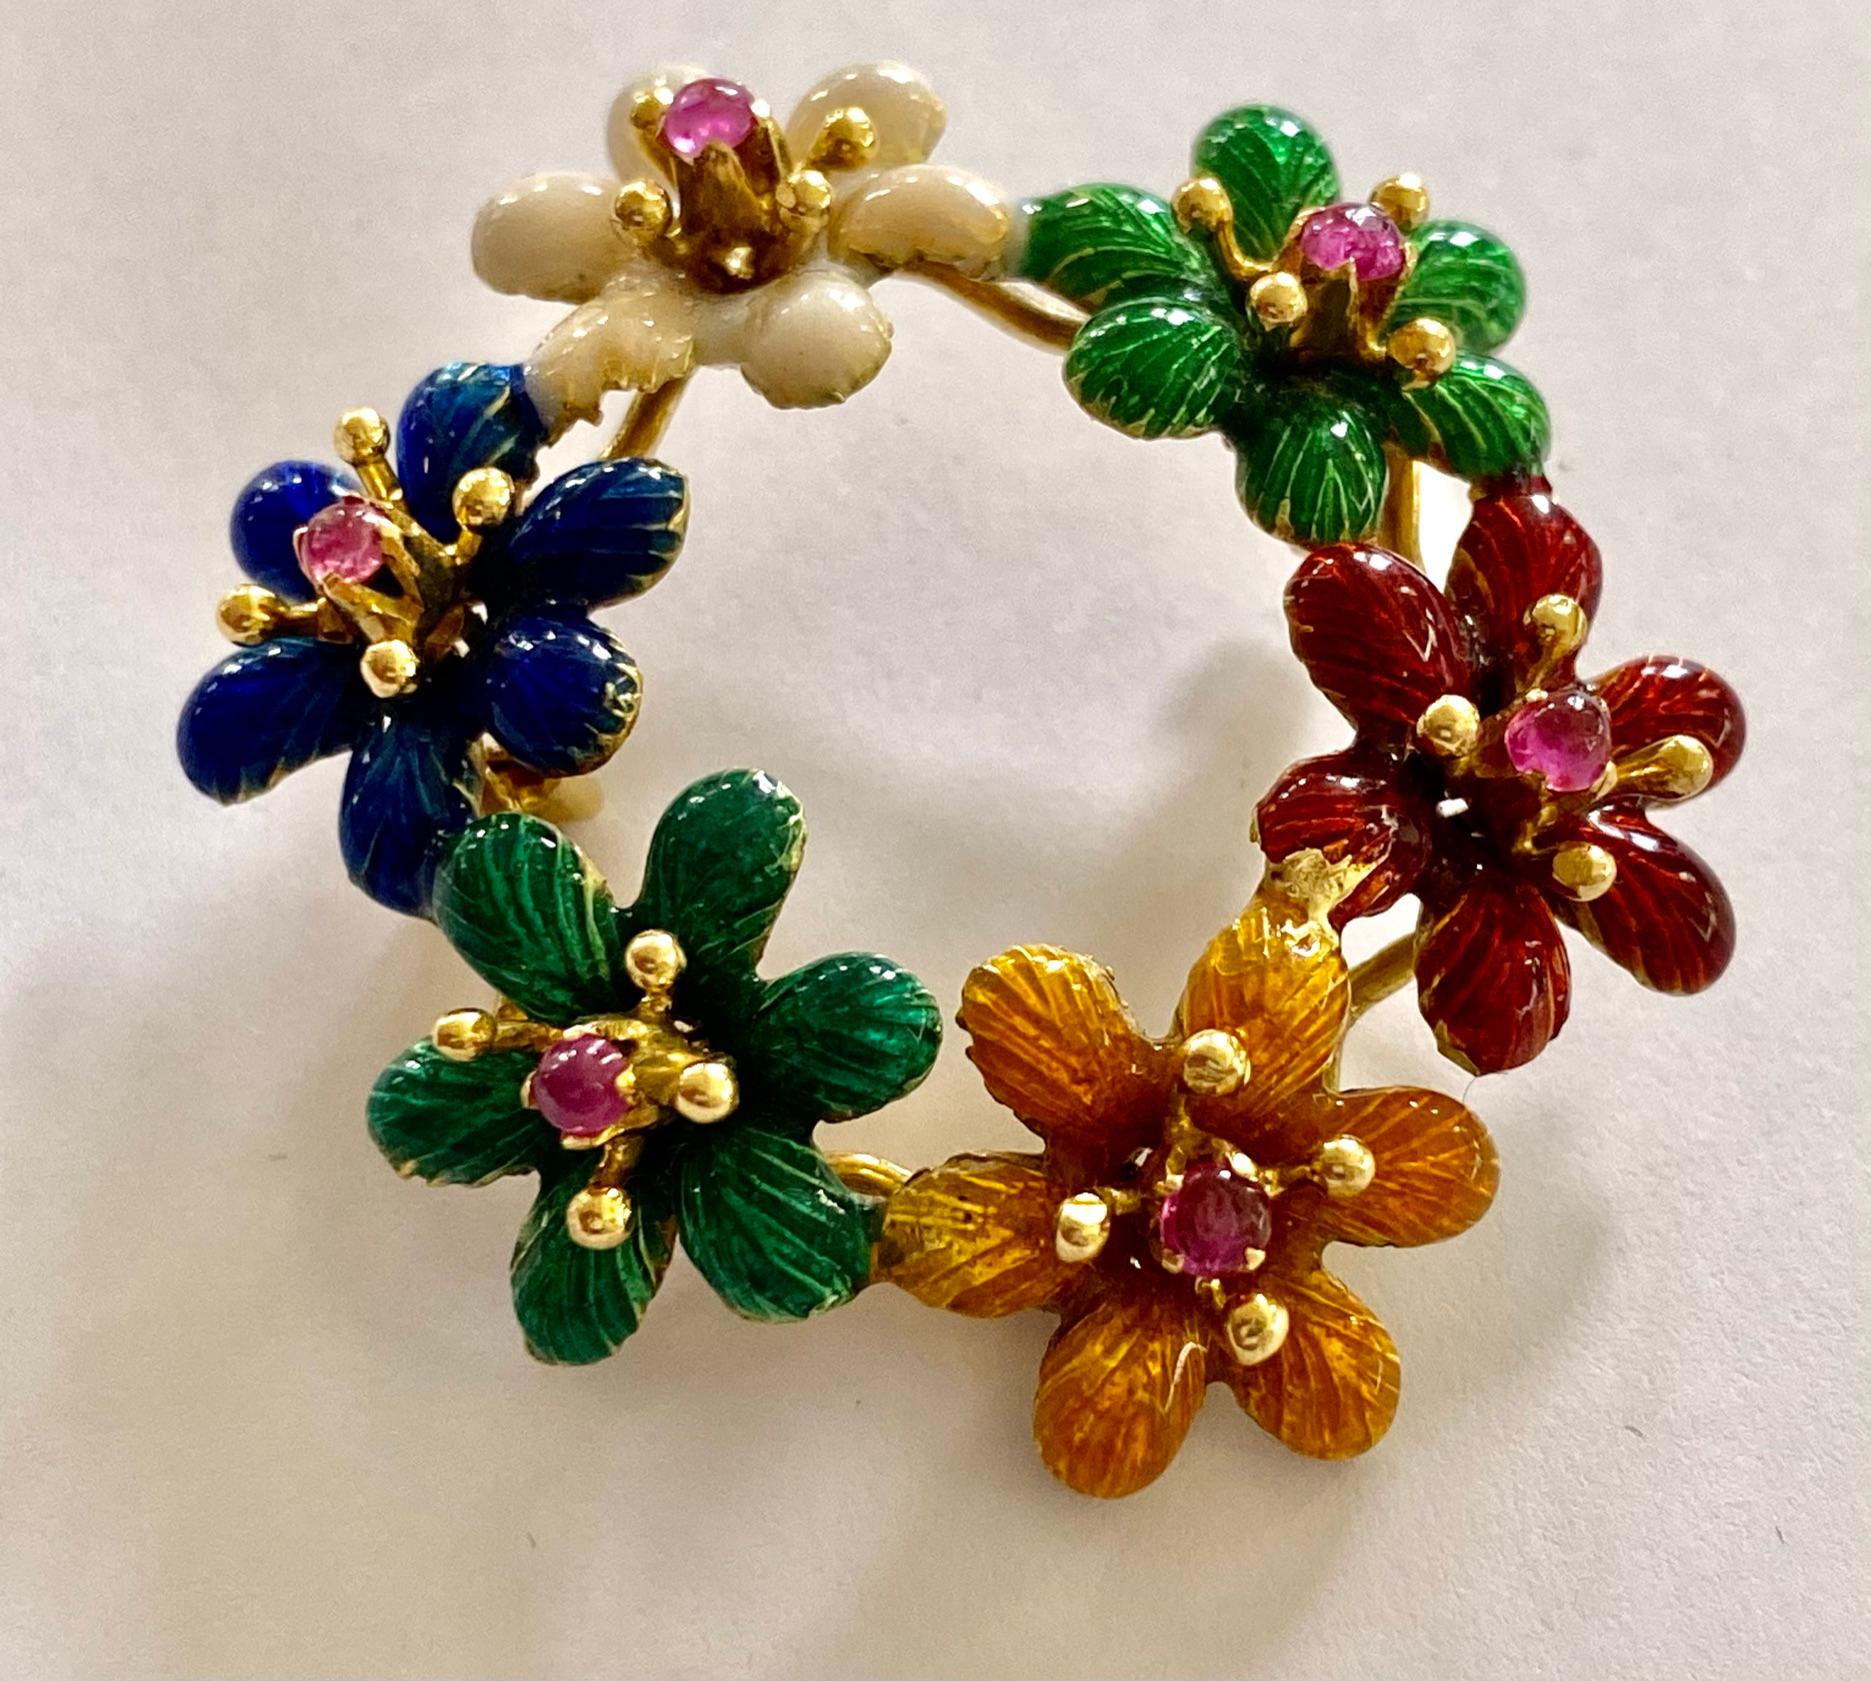 One (1) 18 Karat Yellow Gold Brooch, stamped 750,  decorated with Yellow, Red, Green, White, Blue and Bluish Green Enemal.
set with 6 (six) Natural Corundum, Pink Sapphire stones in cabuchon  shape cutting.
Weight of the Sapphires: 0.50ct.  (No